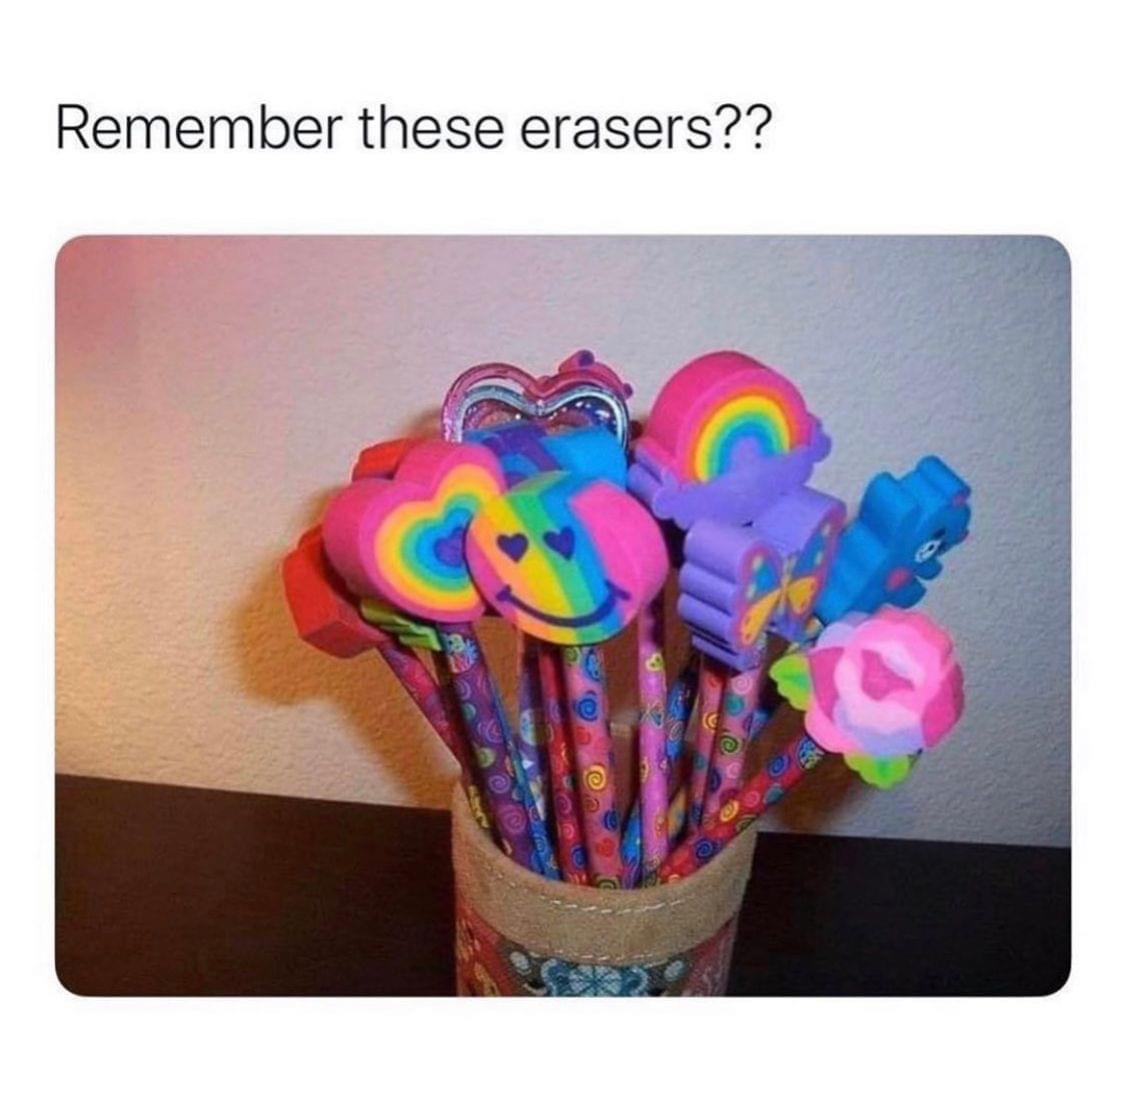 lisa frank pencils - Remember these erasers??